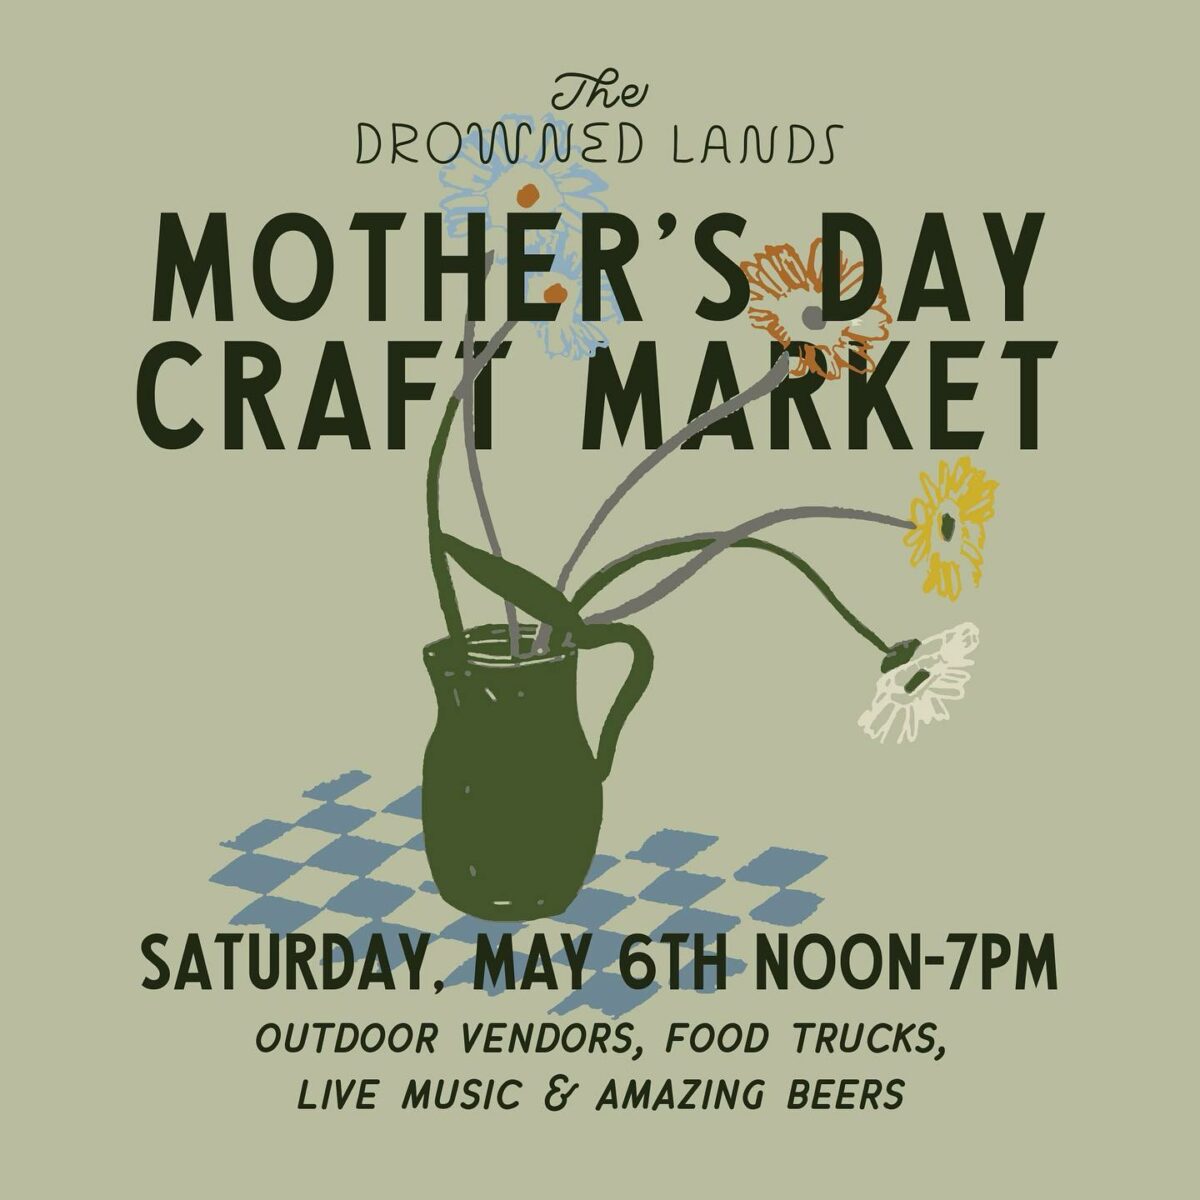 The Drowned Lands Mother's Day Craft Market